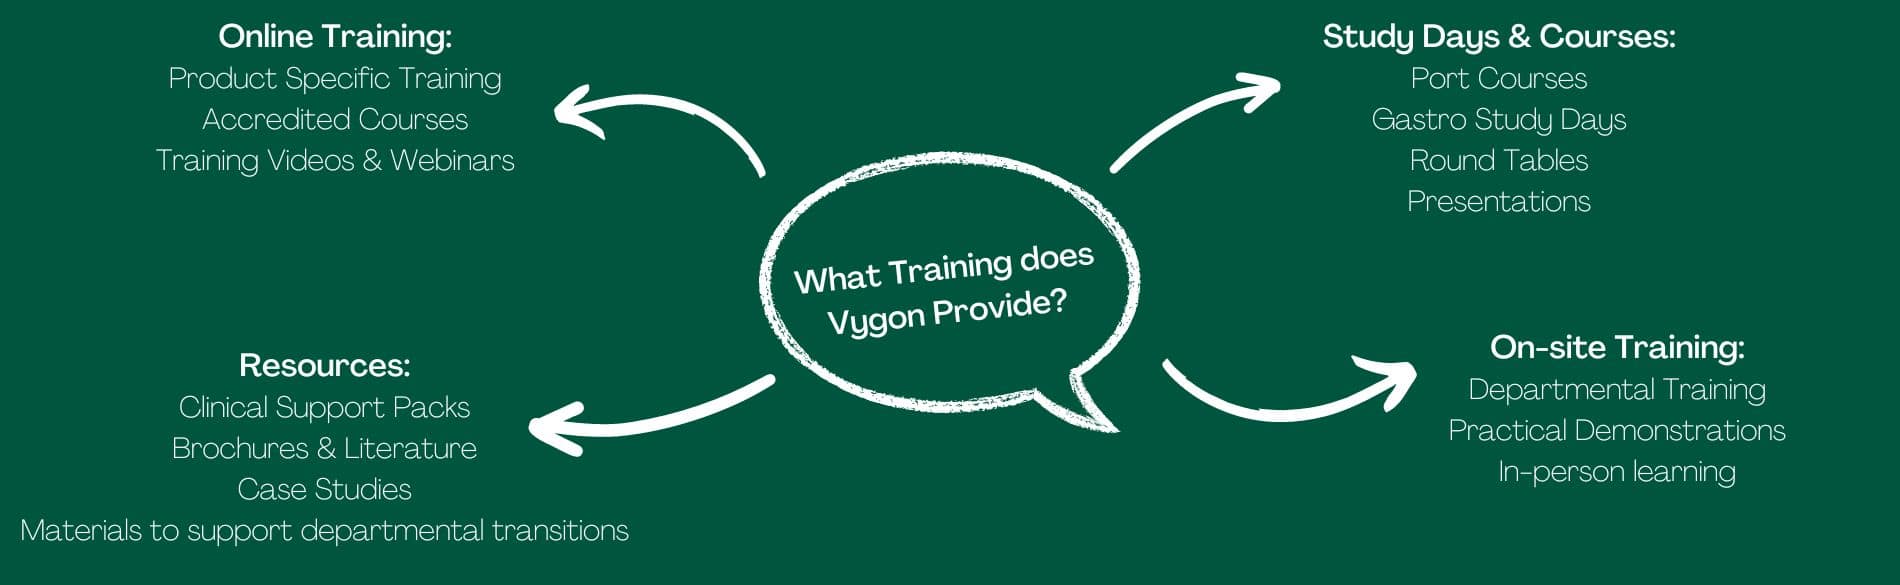 What Training does Vygon Provide